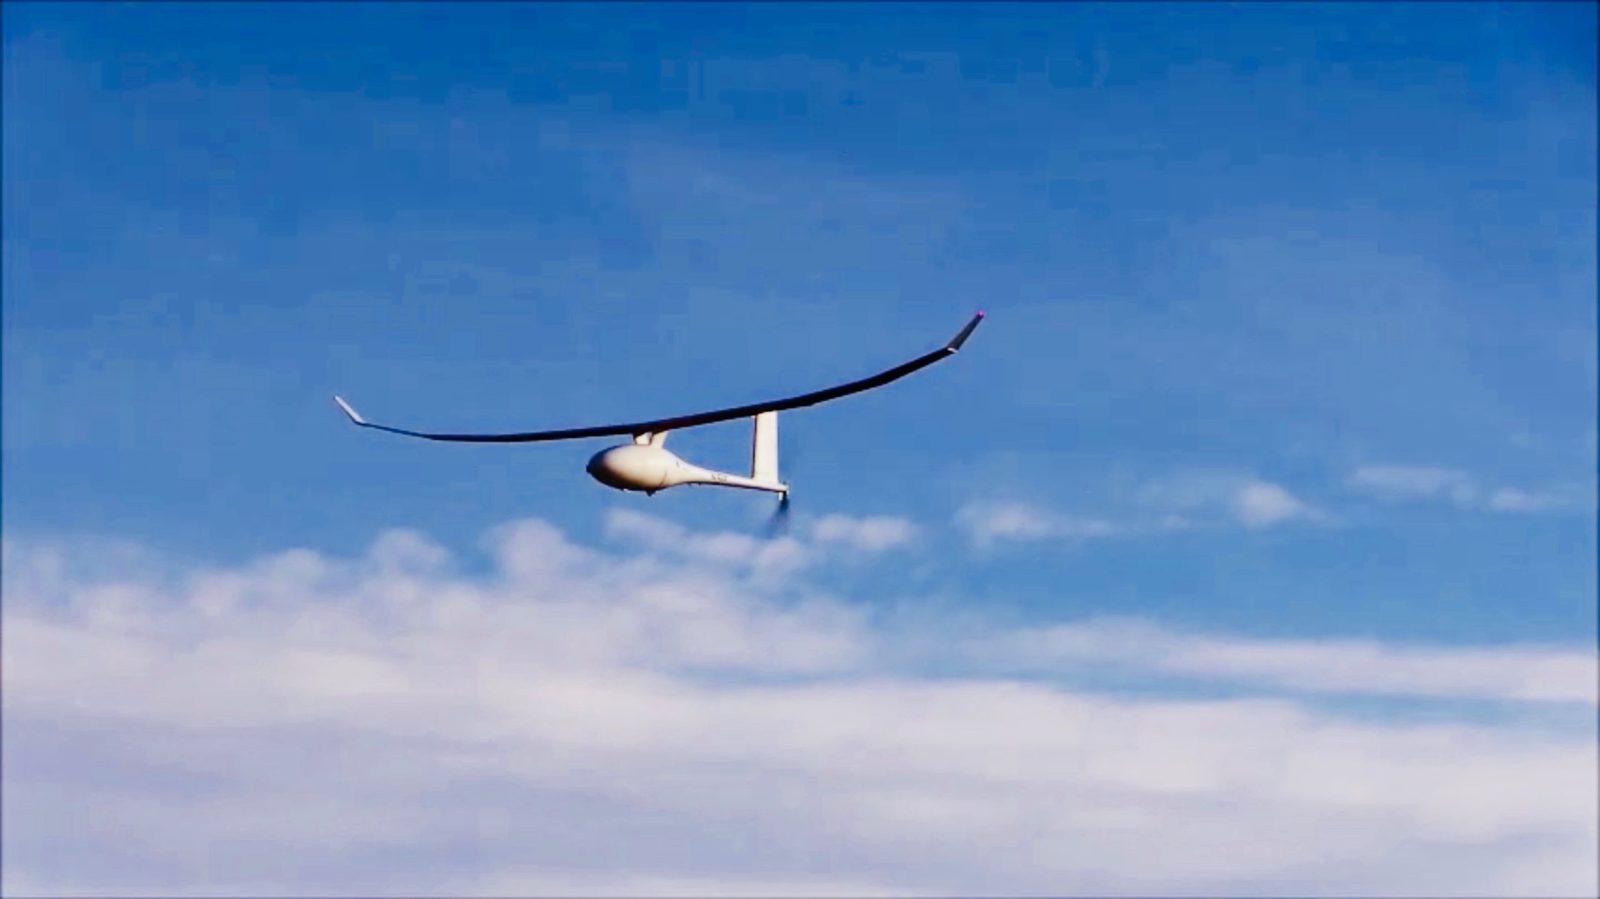 Vanilla VA001 drone sets new endurance record after five days in the air